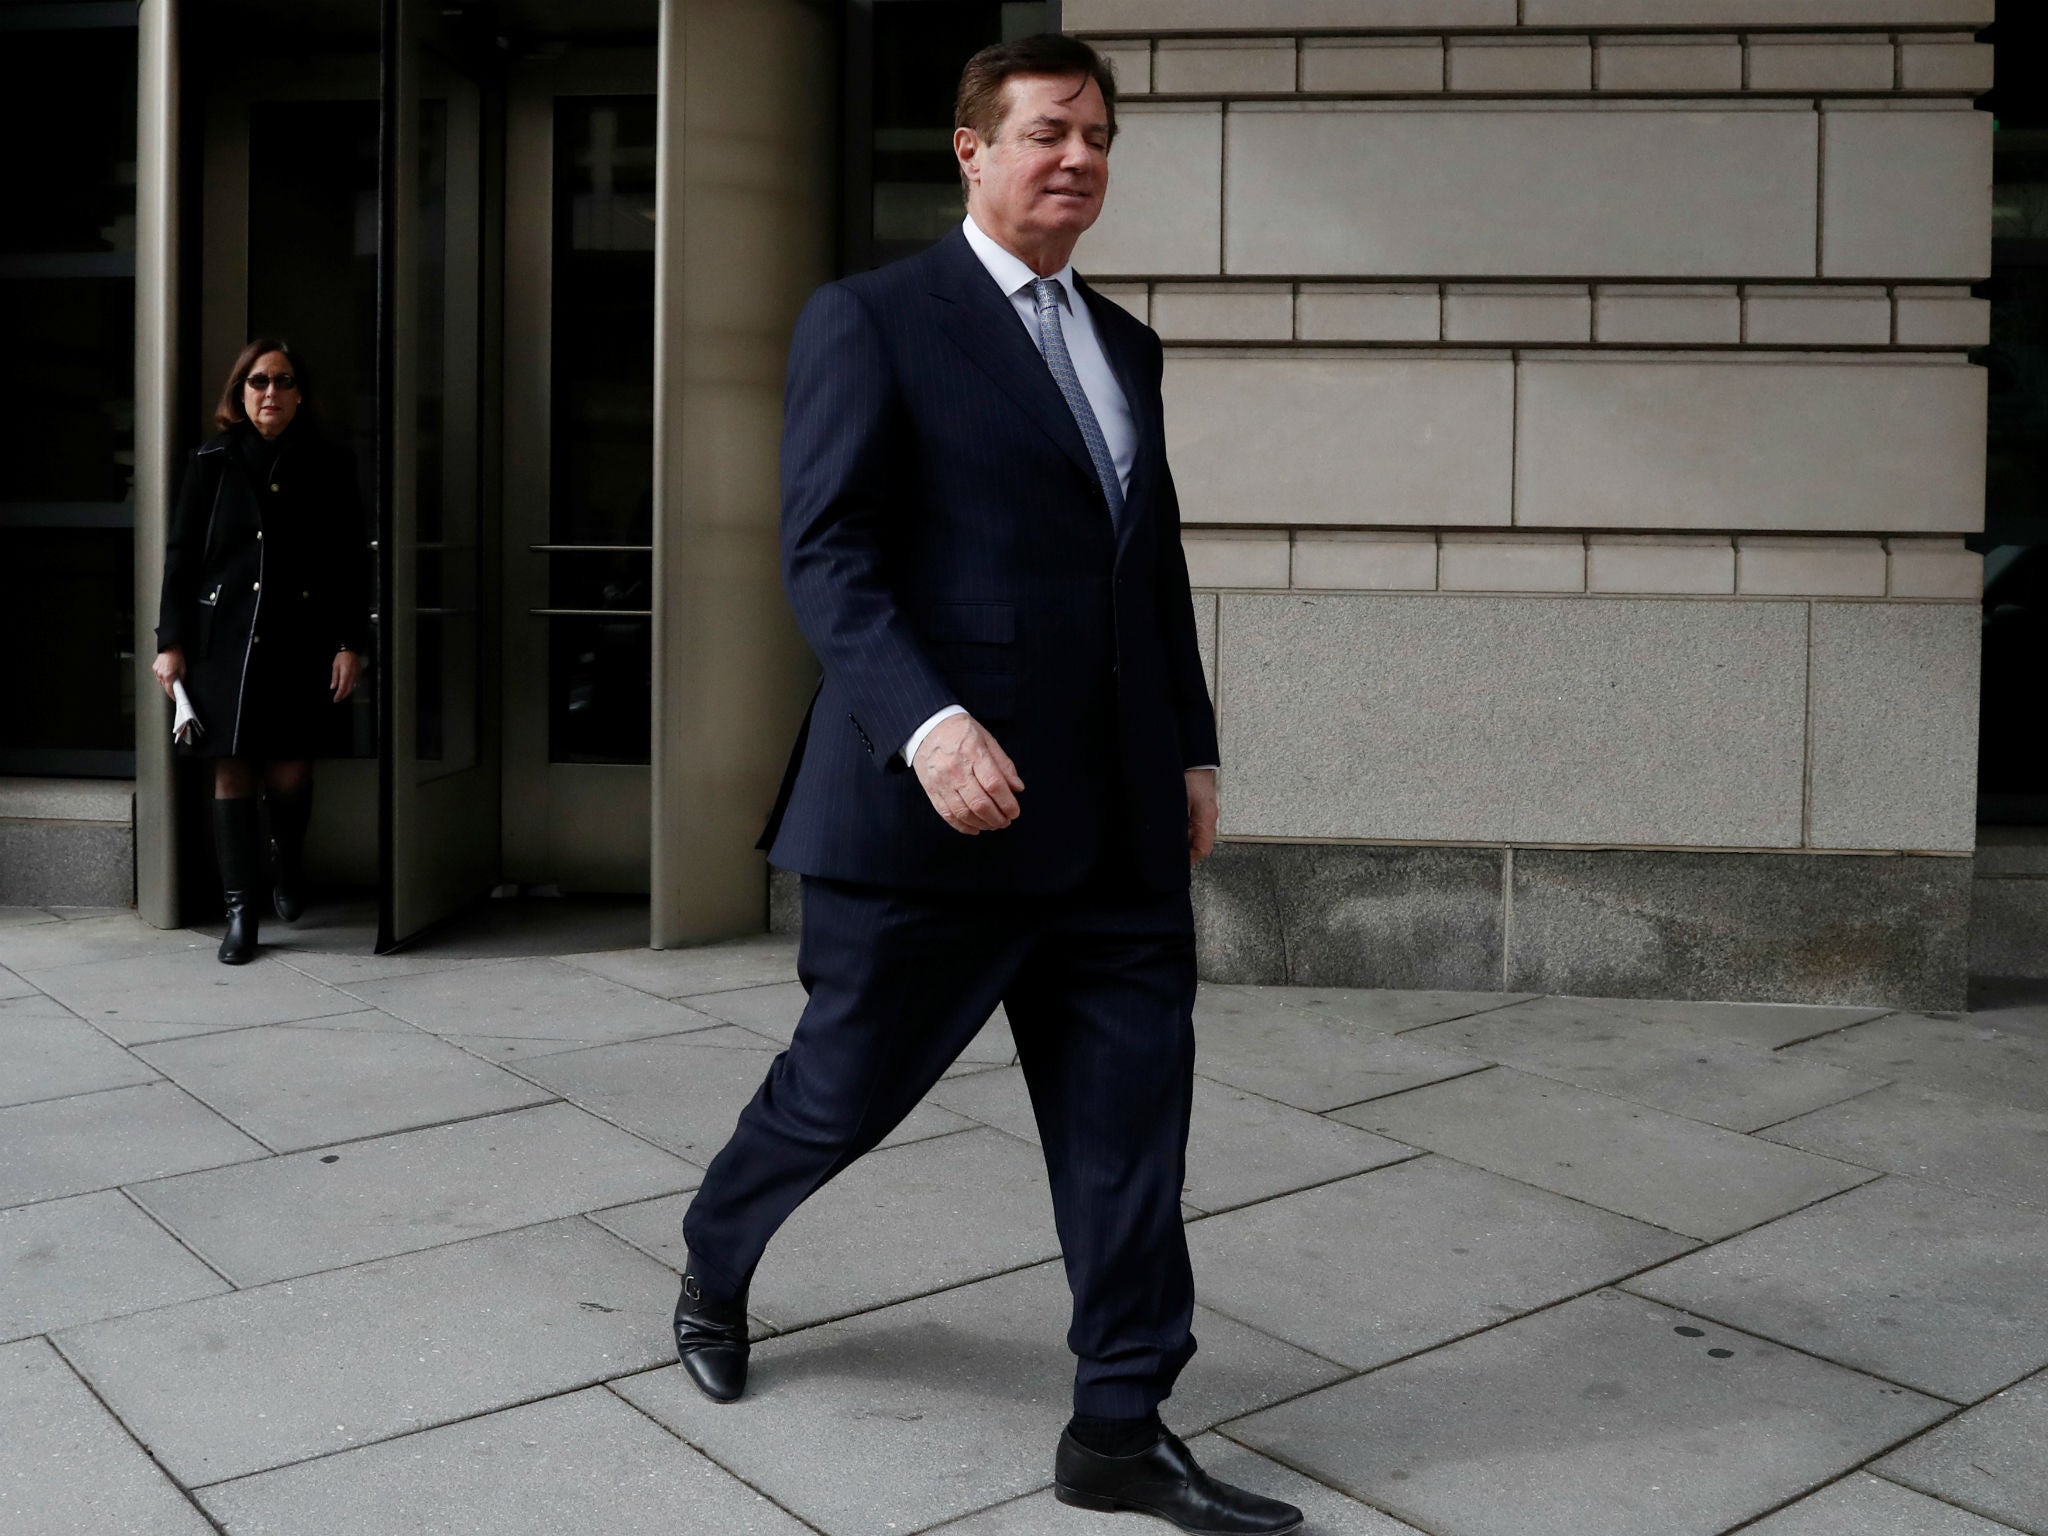 Paul Manafort leaves US District Court in Washington, DC February 14, 2018